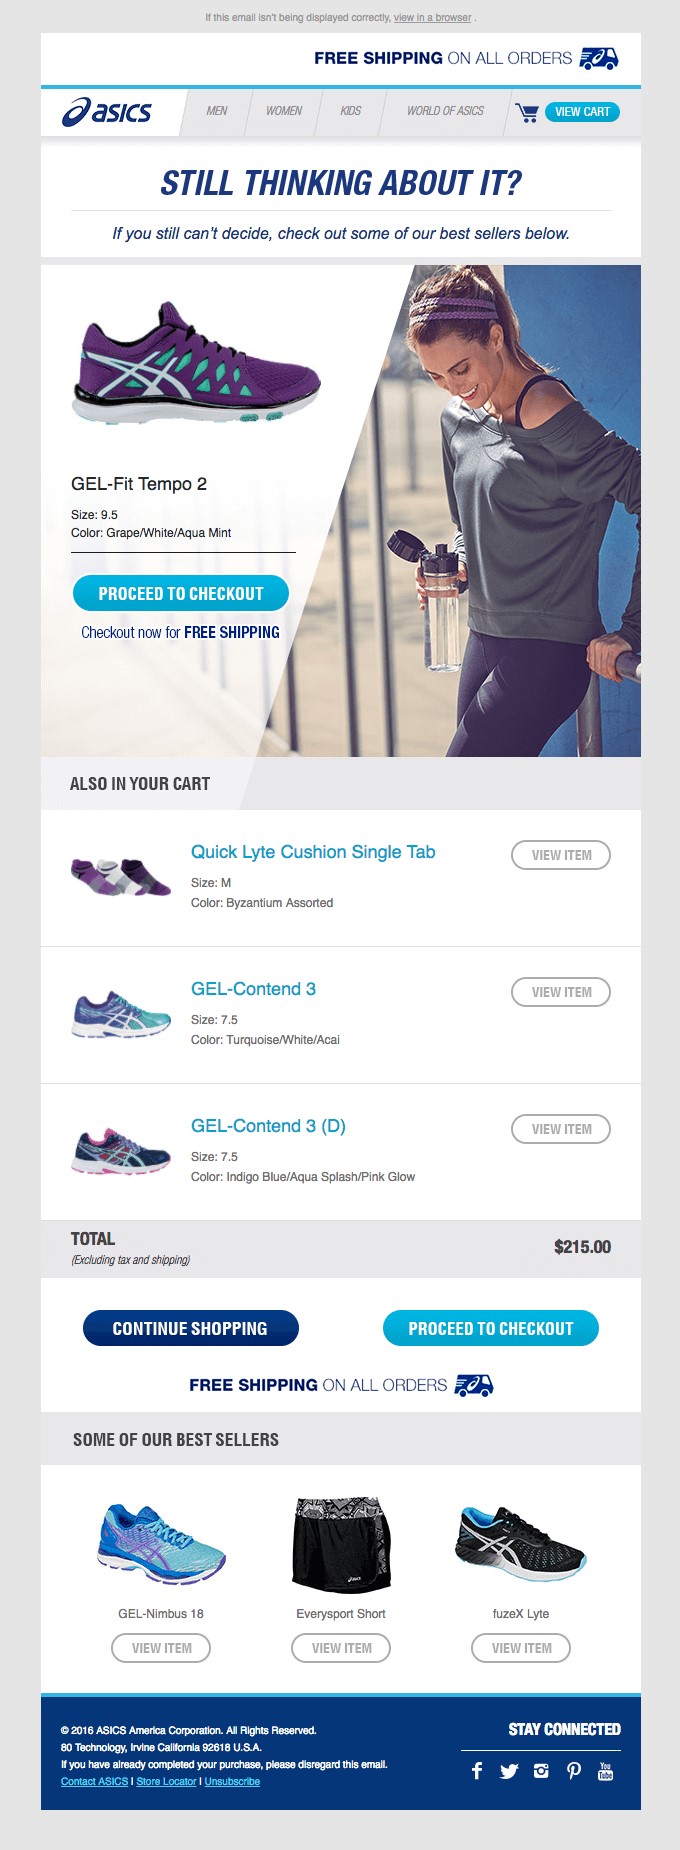 By receiving this email, Asics reminds the customer about finishing the purchase and pushes them a step closer to a final sale.